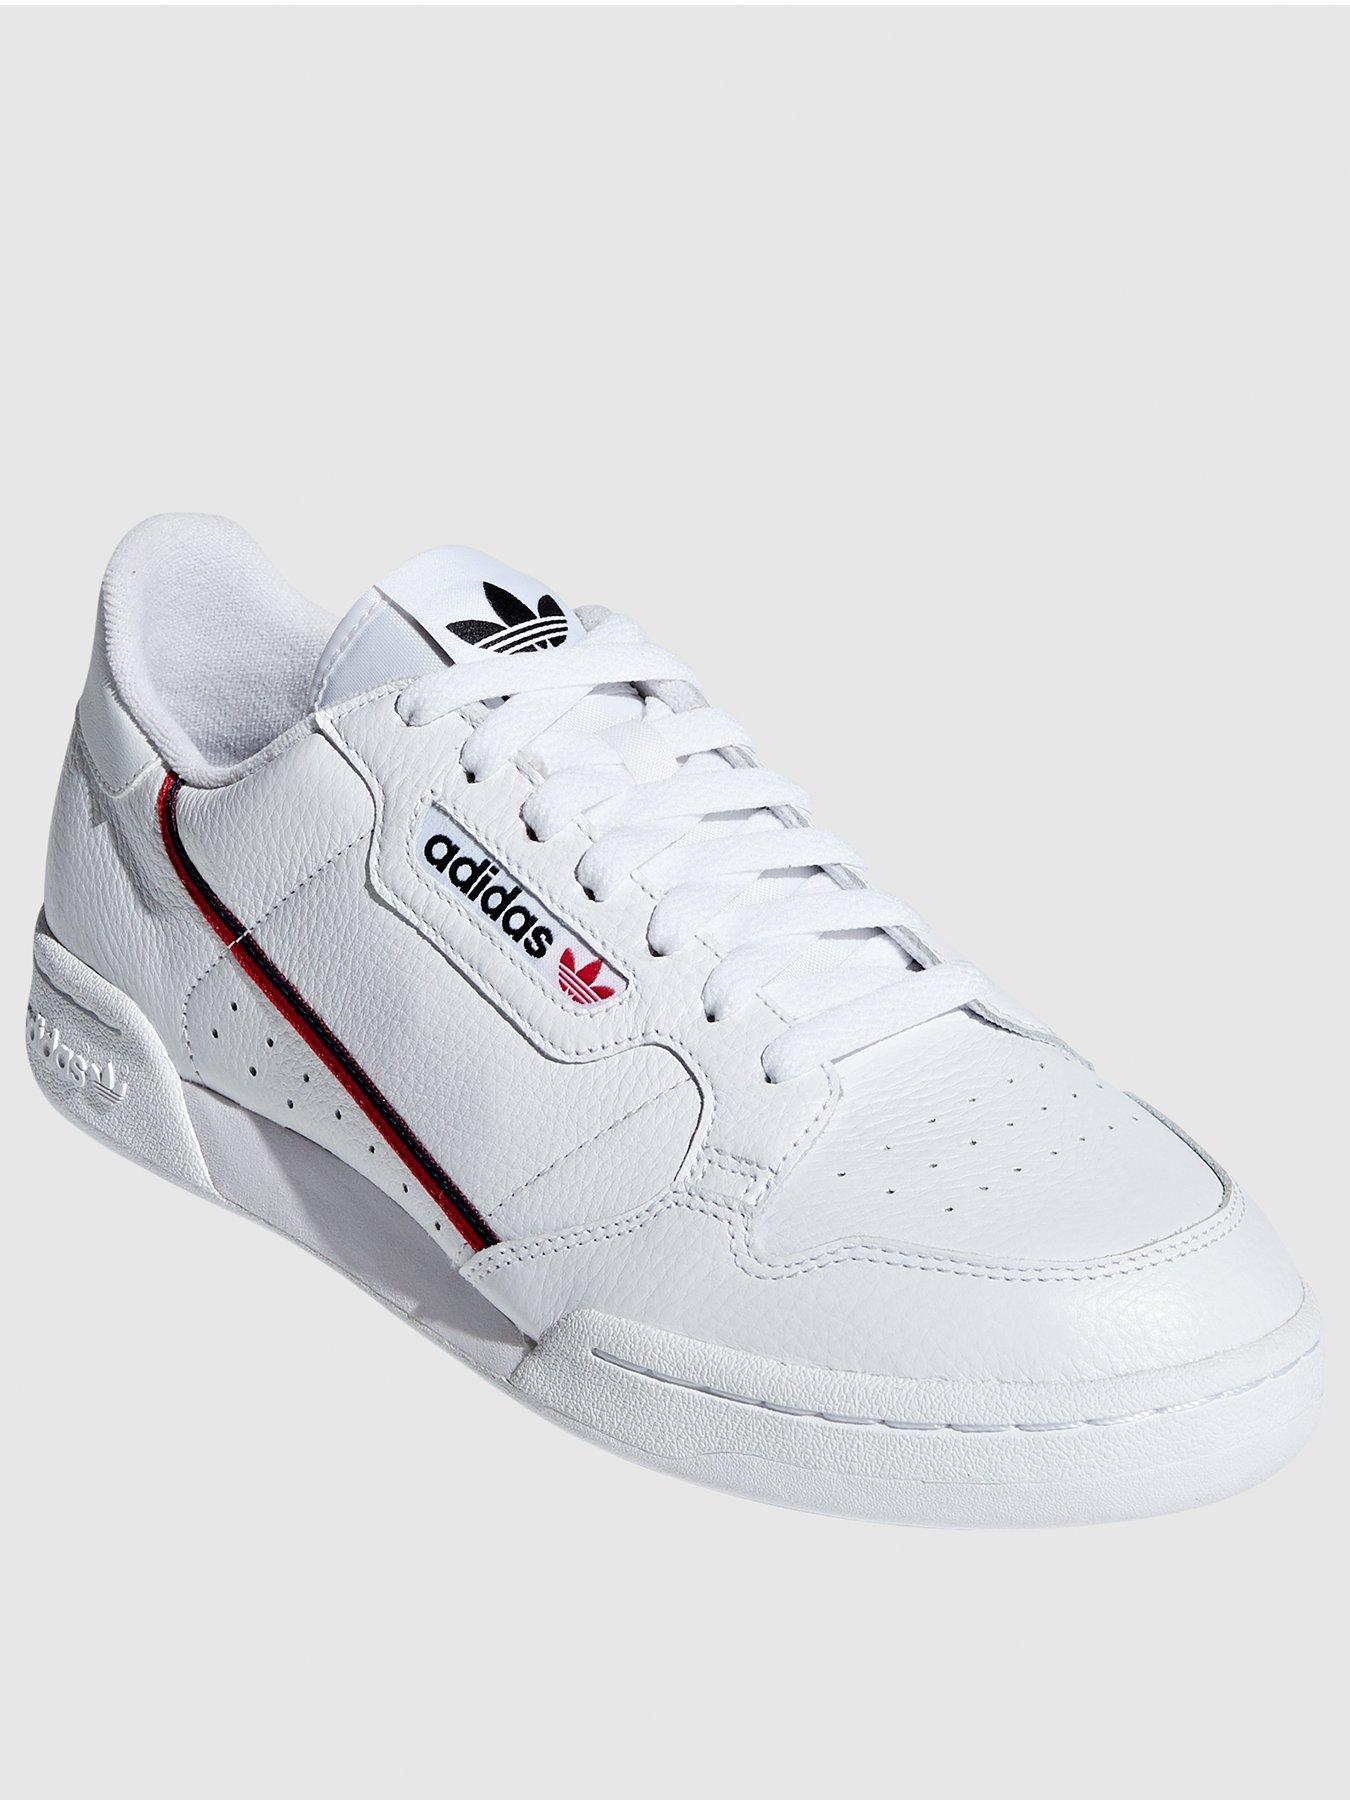 how do adidas continental fit